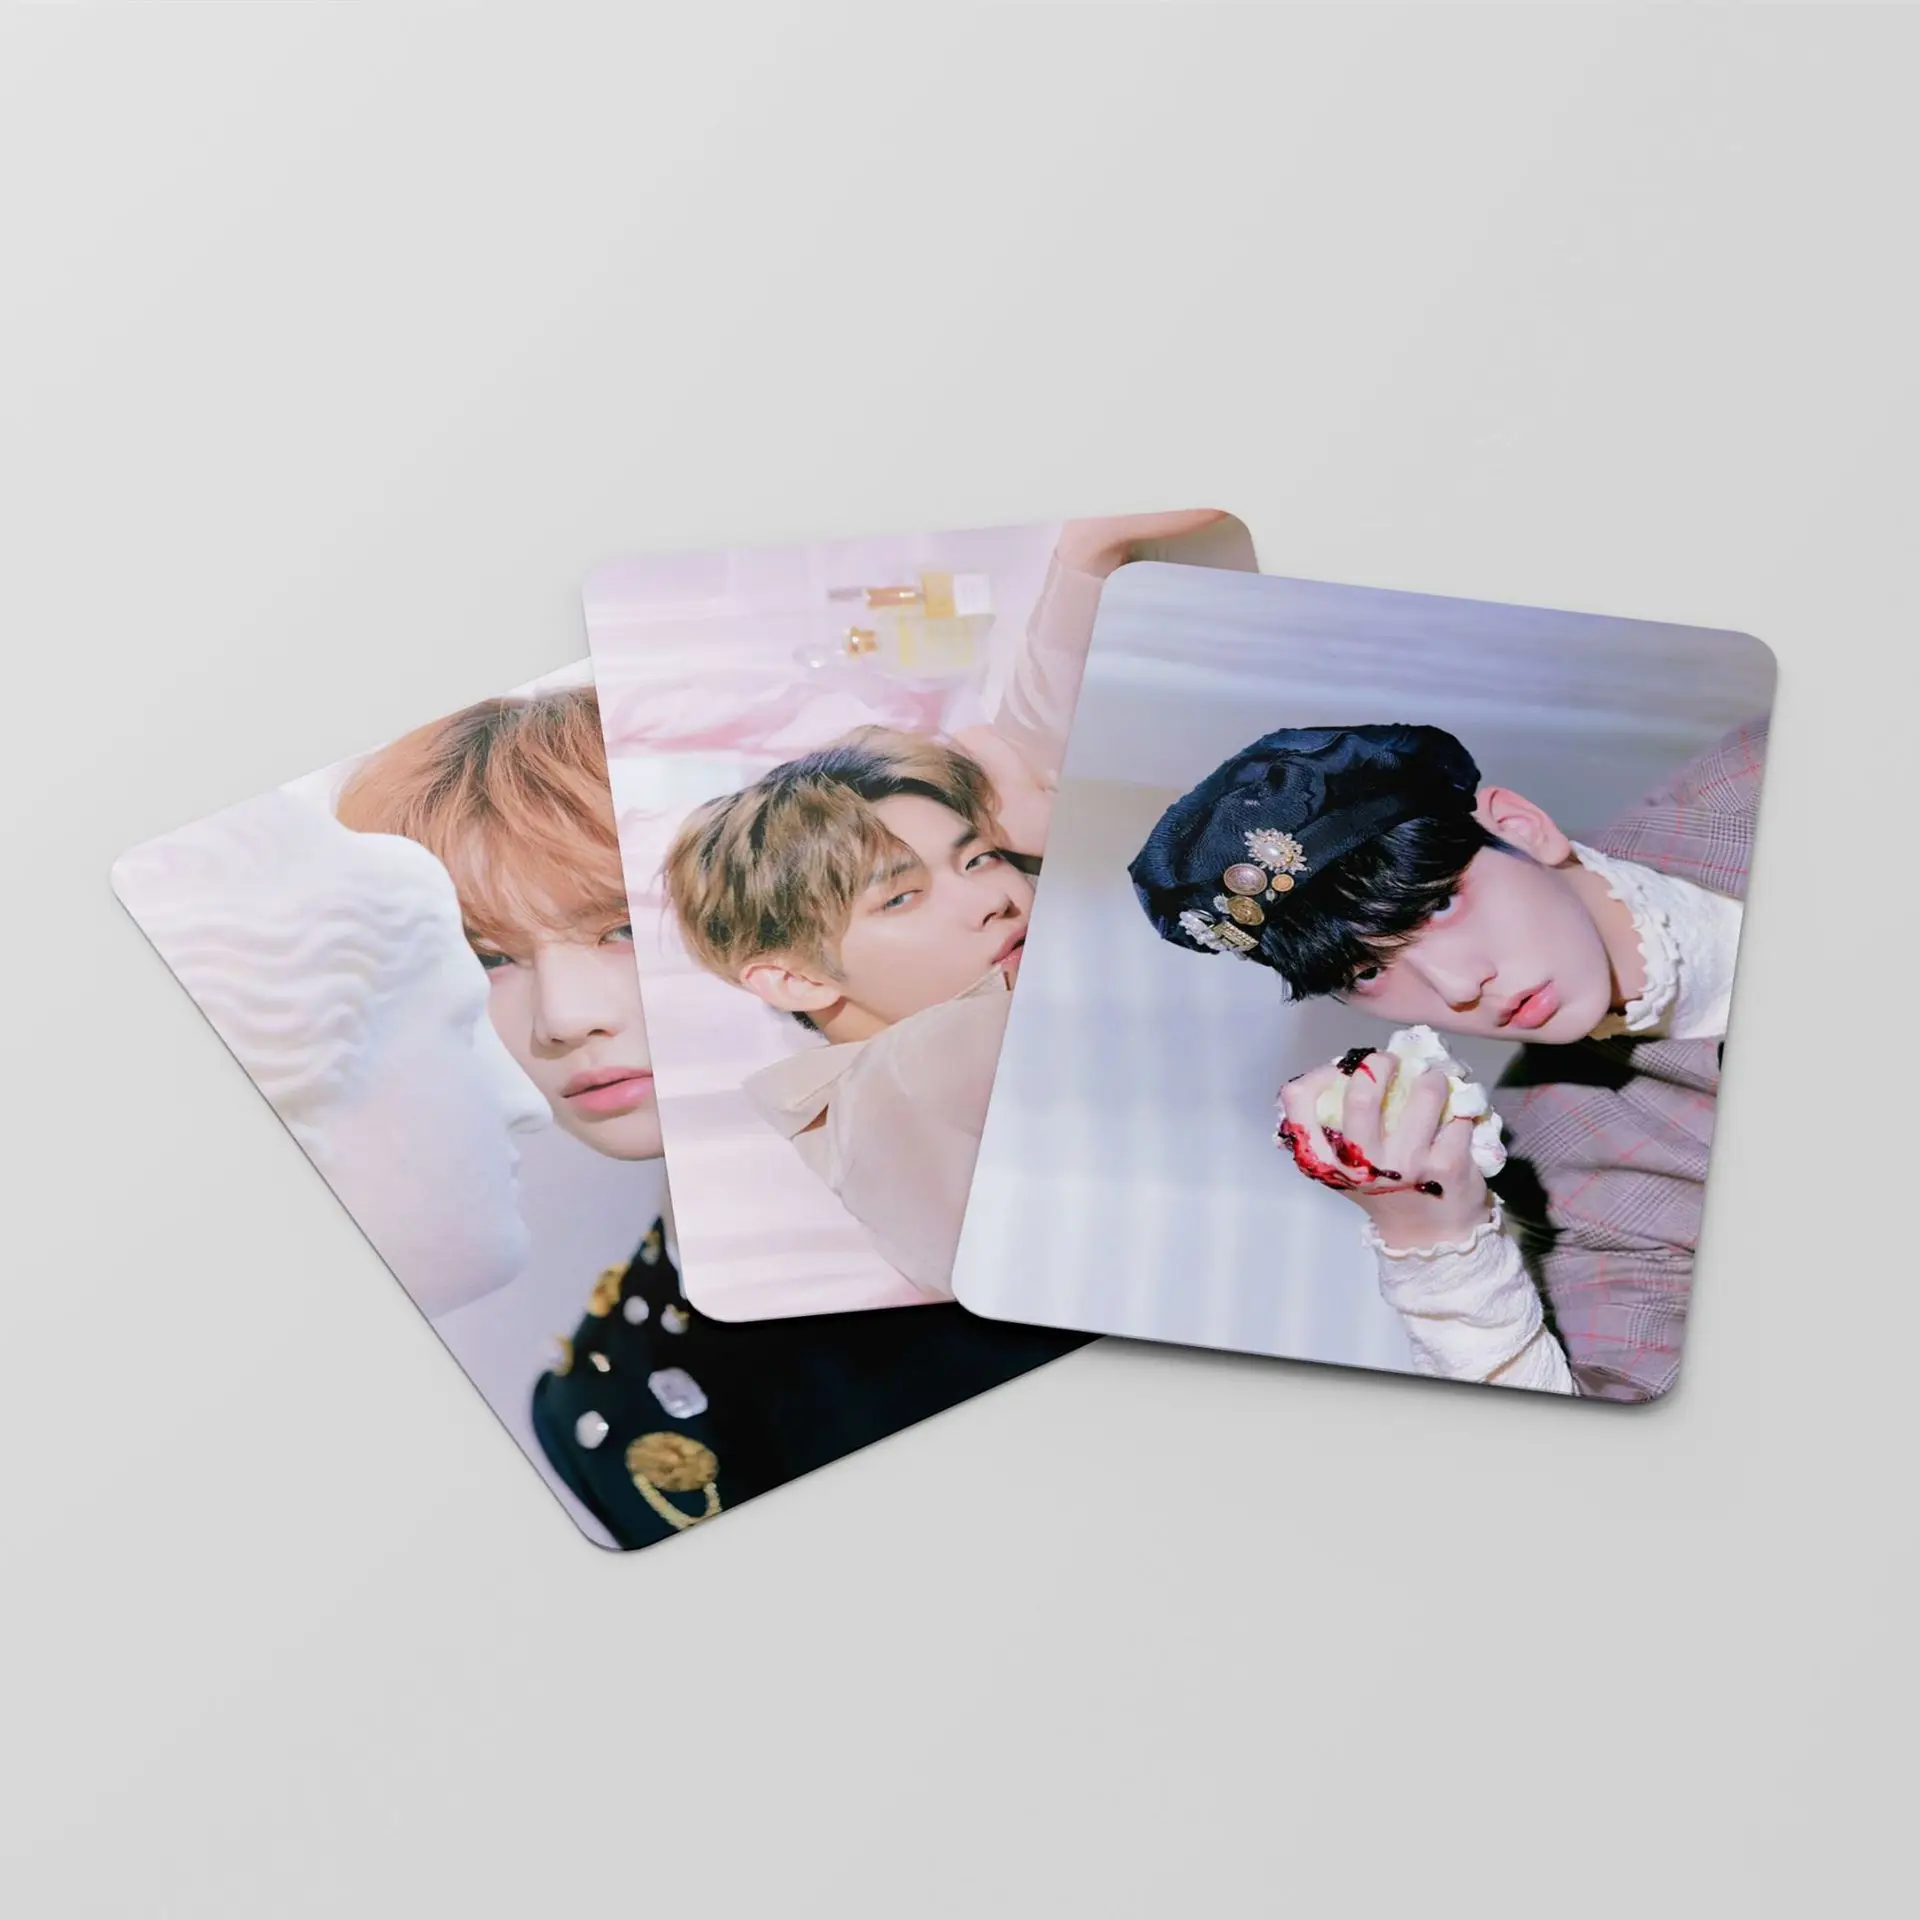 New 55Pcs/set KPOP EXO New OBSESSION 6th Album Photo Card Self Made LOMO Card Photocard images - 6